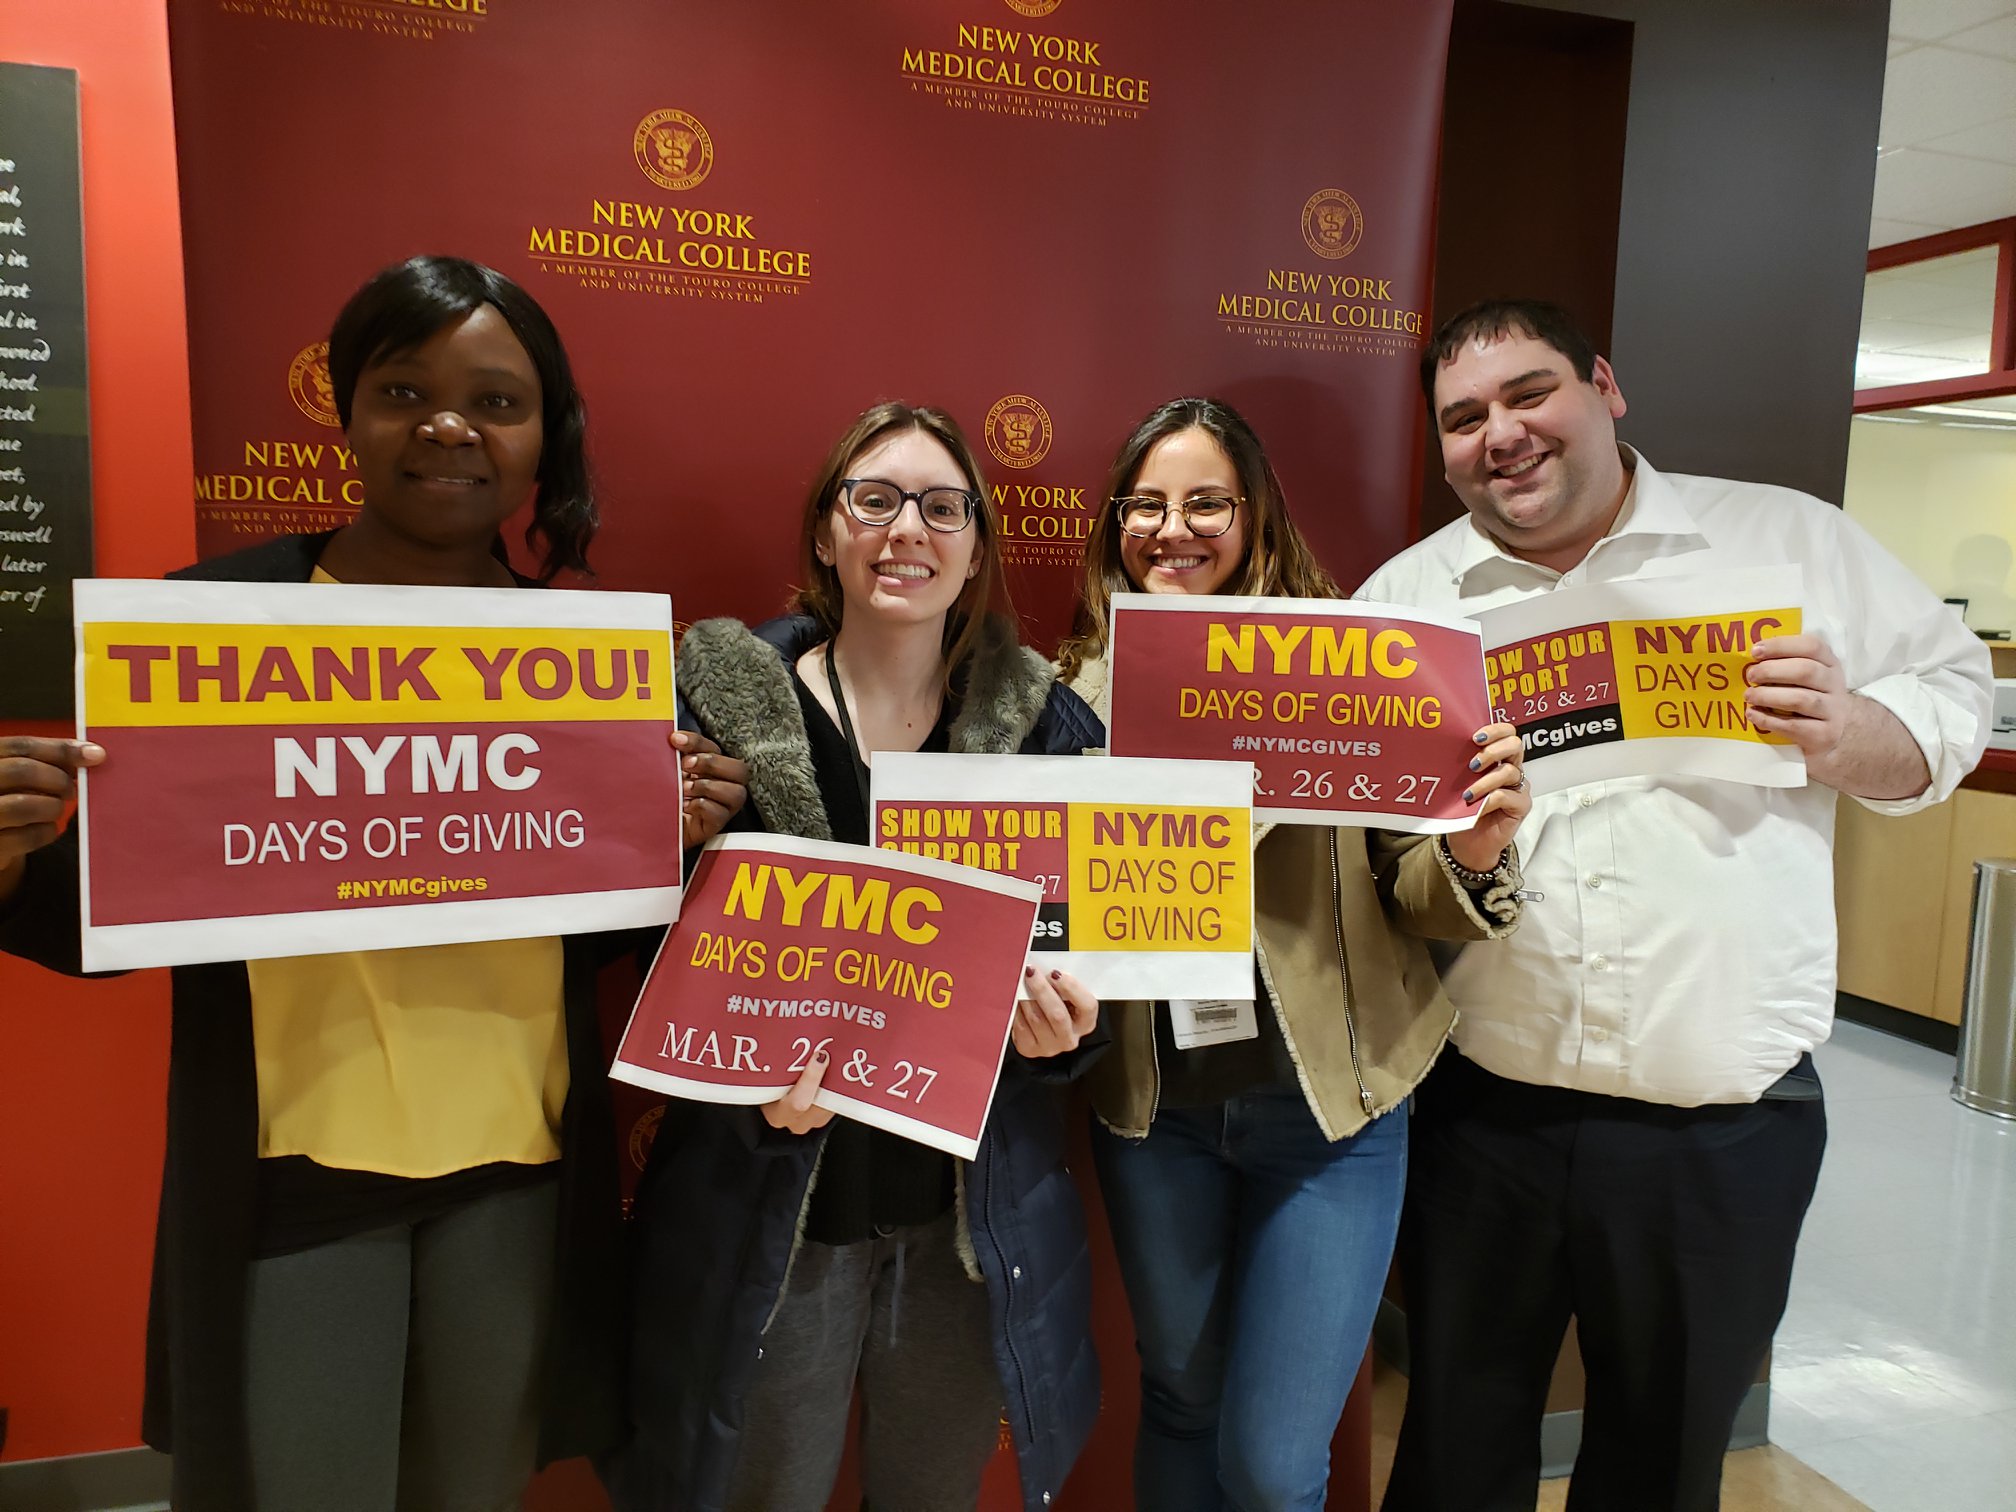 NYMC's Days of Giving campaign fundraiser participants group